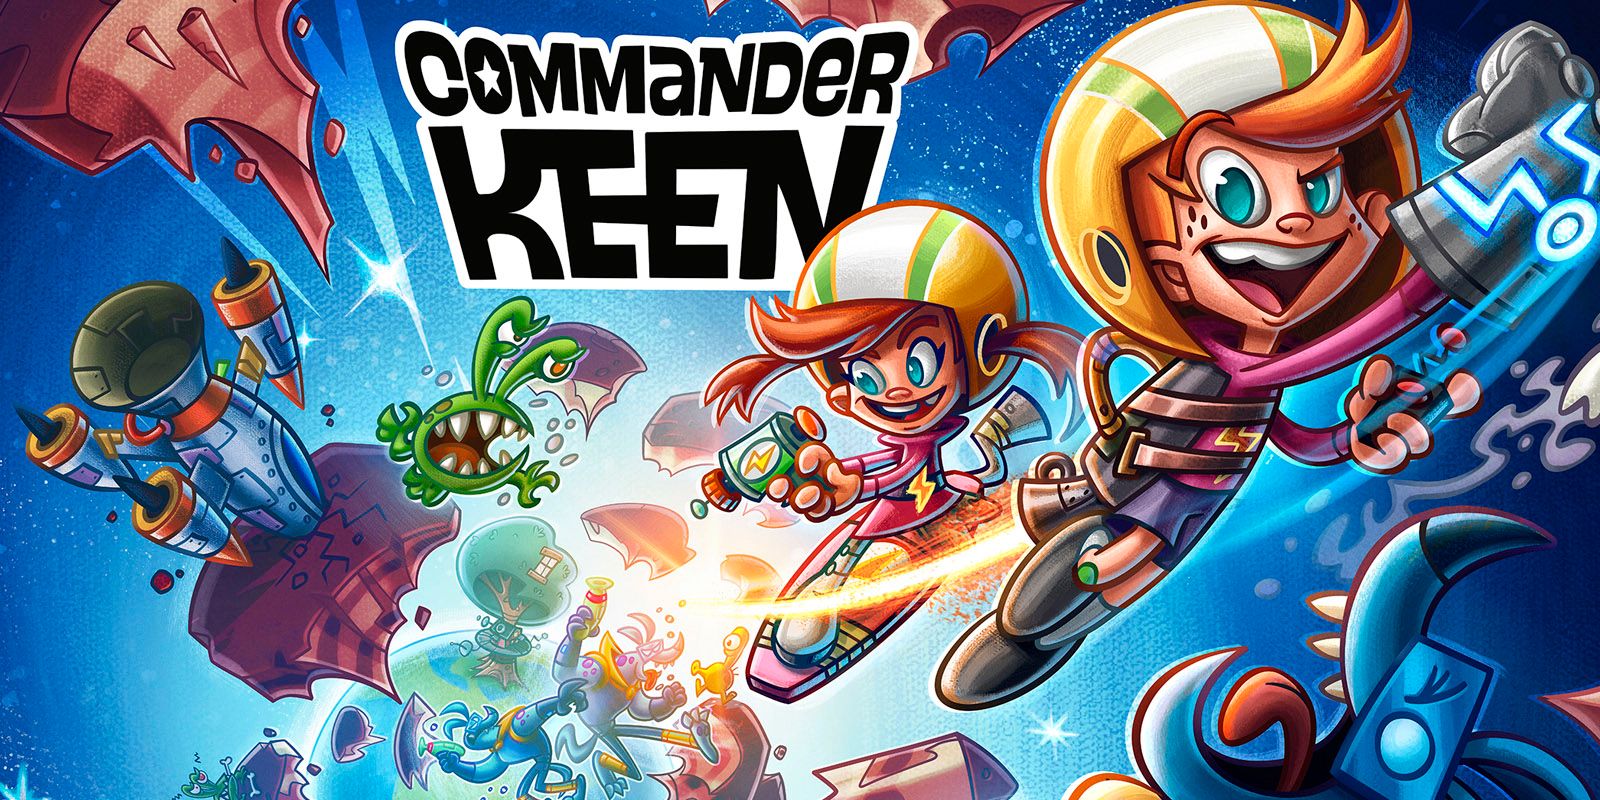 That Hated Commander Keen Mobile Games Seems To Have Been Canceled